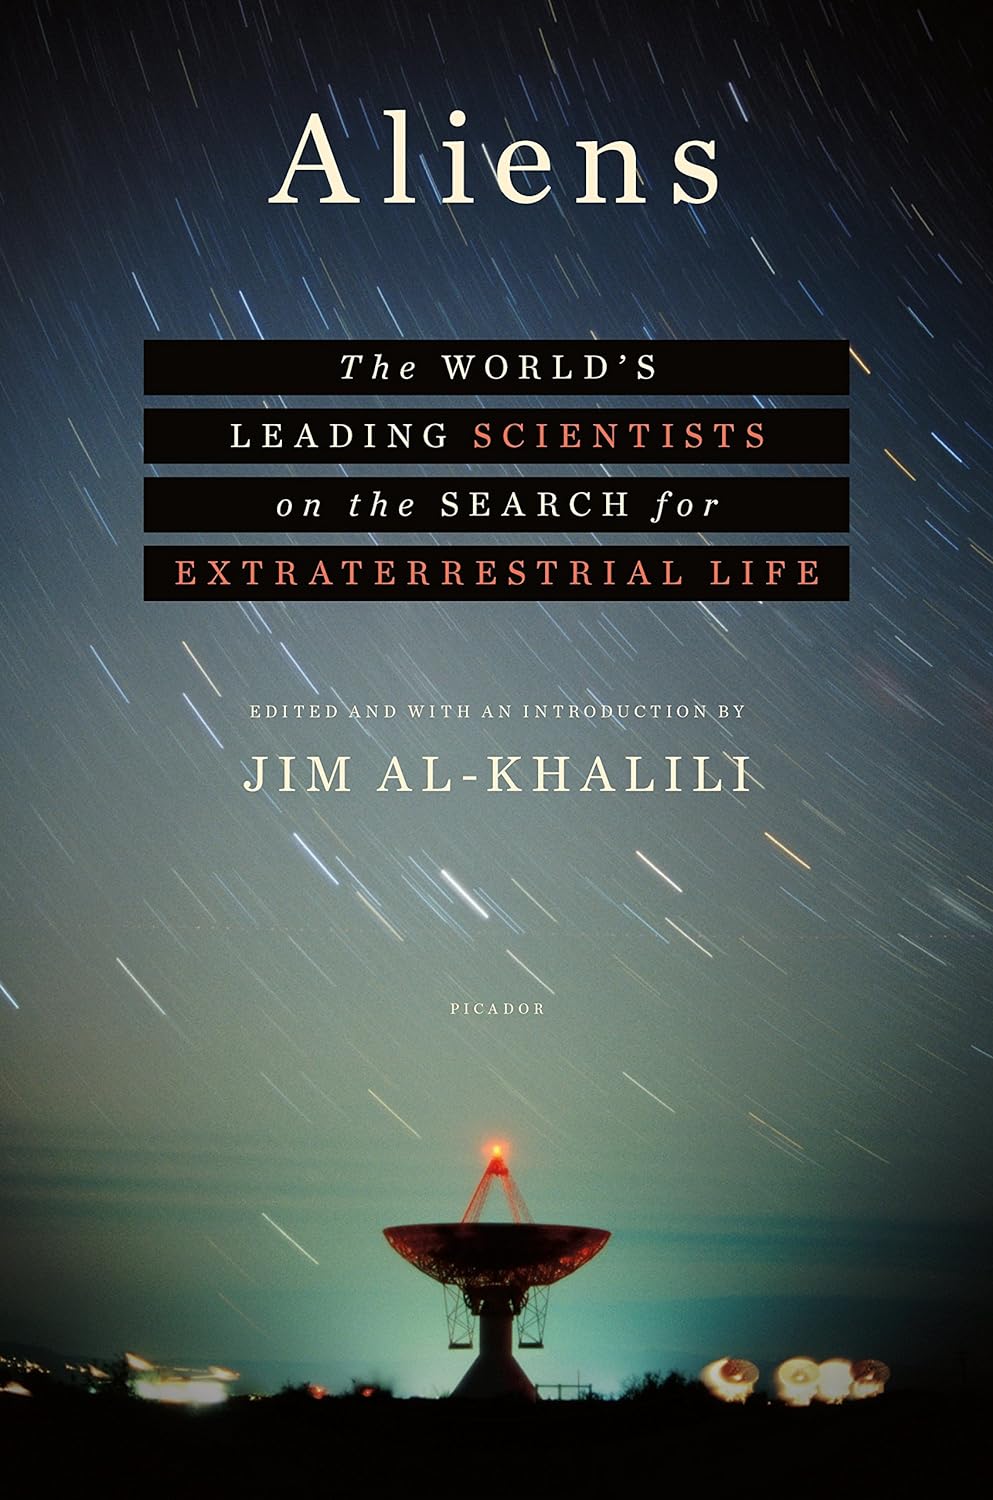 Aliens: The World's Leading Scientists on the Search for Extraterrestrial Life, by Jim Al-Khalili